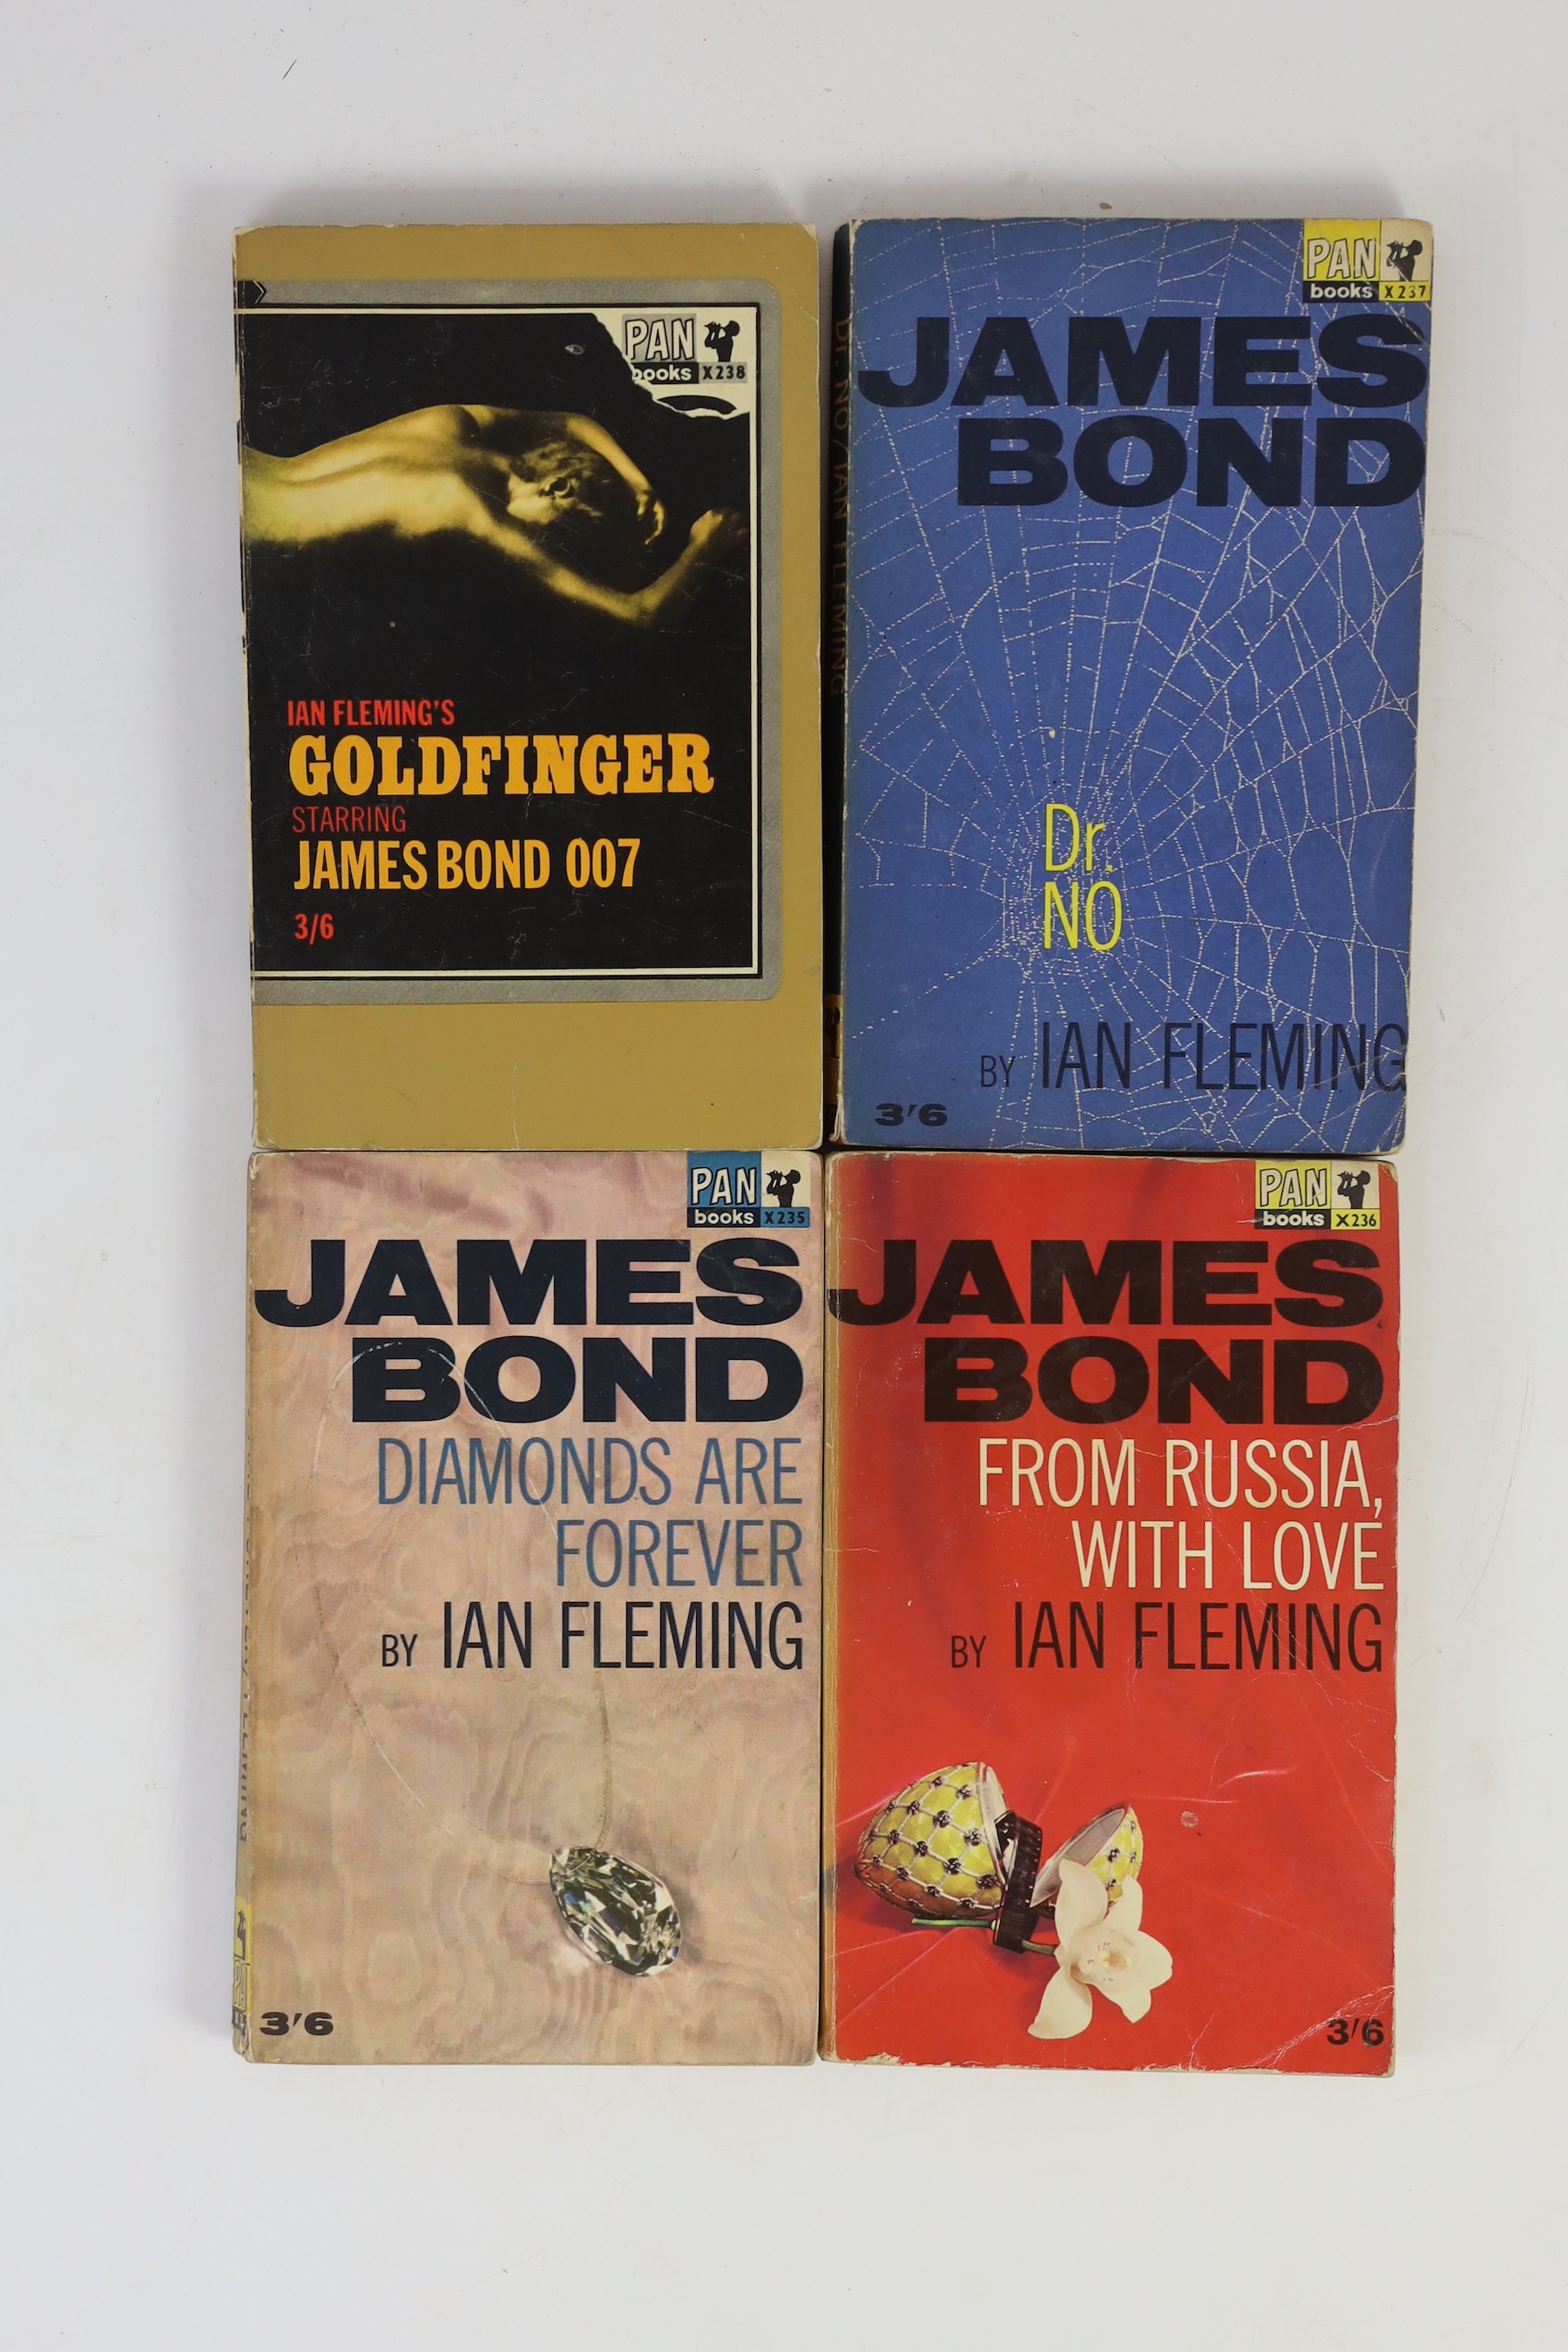 Fleming, Ian - 12 paperbacks, published by Pan Books, consisting - Casino Royale, 1964; Live and Let Die, 1965; Moonraker, 1964; Diamonds Are Forever, 1965; From Russia with Love, 1965; Dr. No, 1964; Goldfinger, 1964; Fo